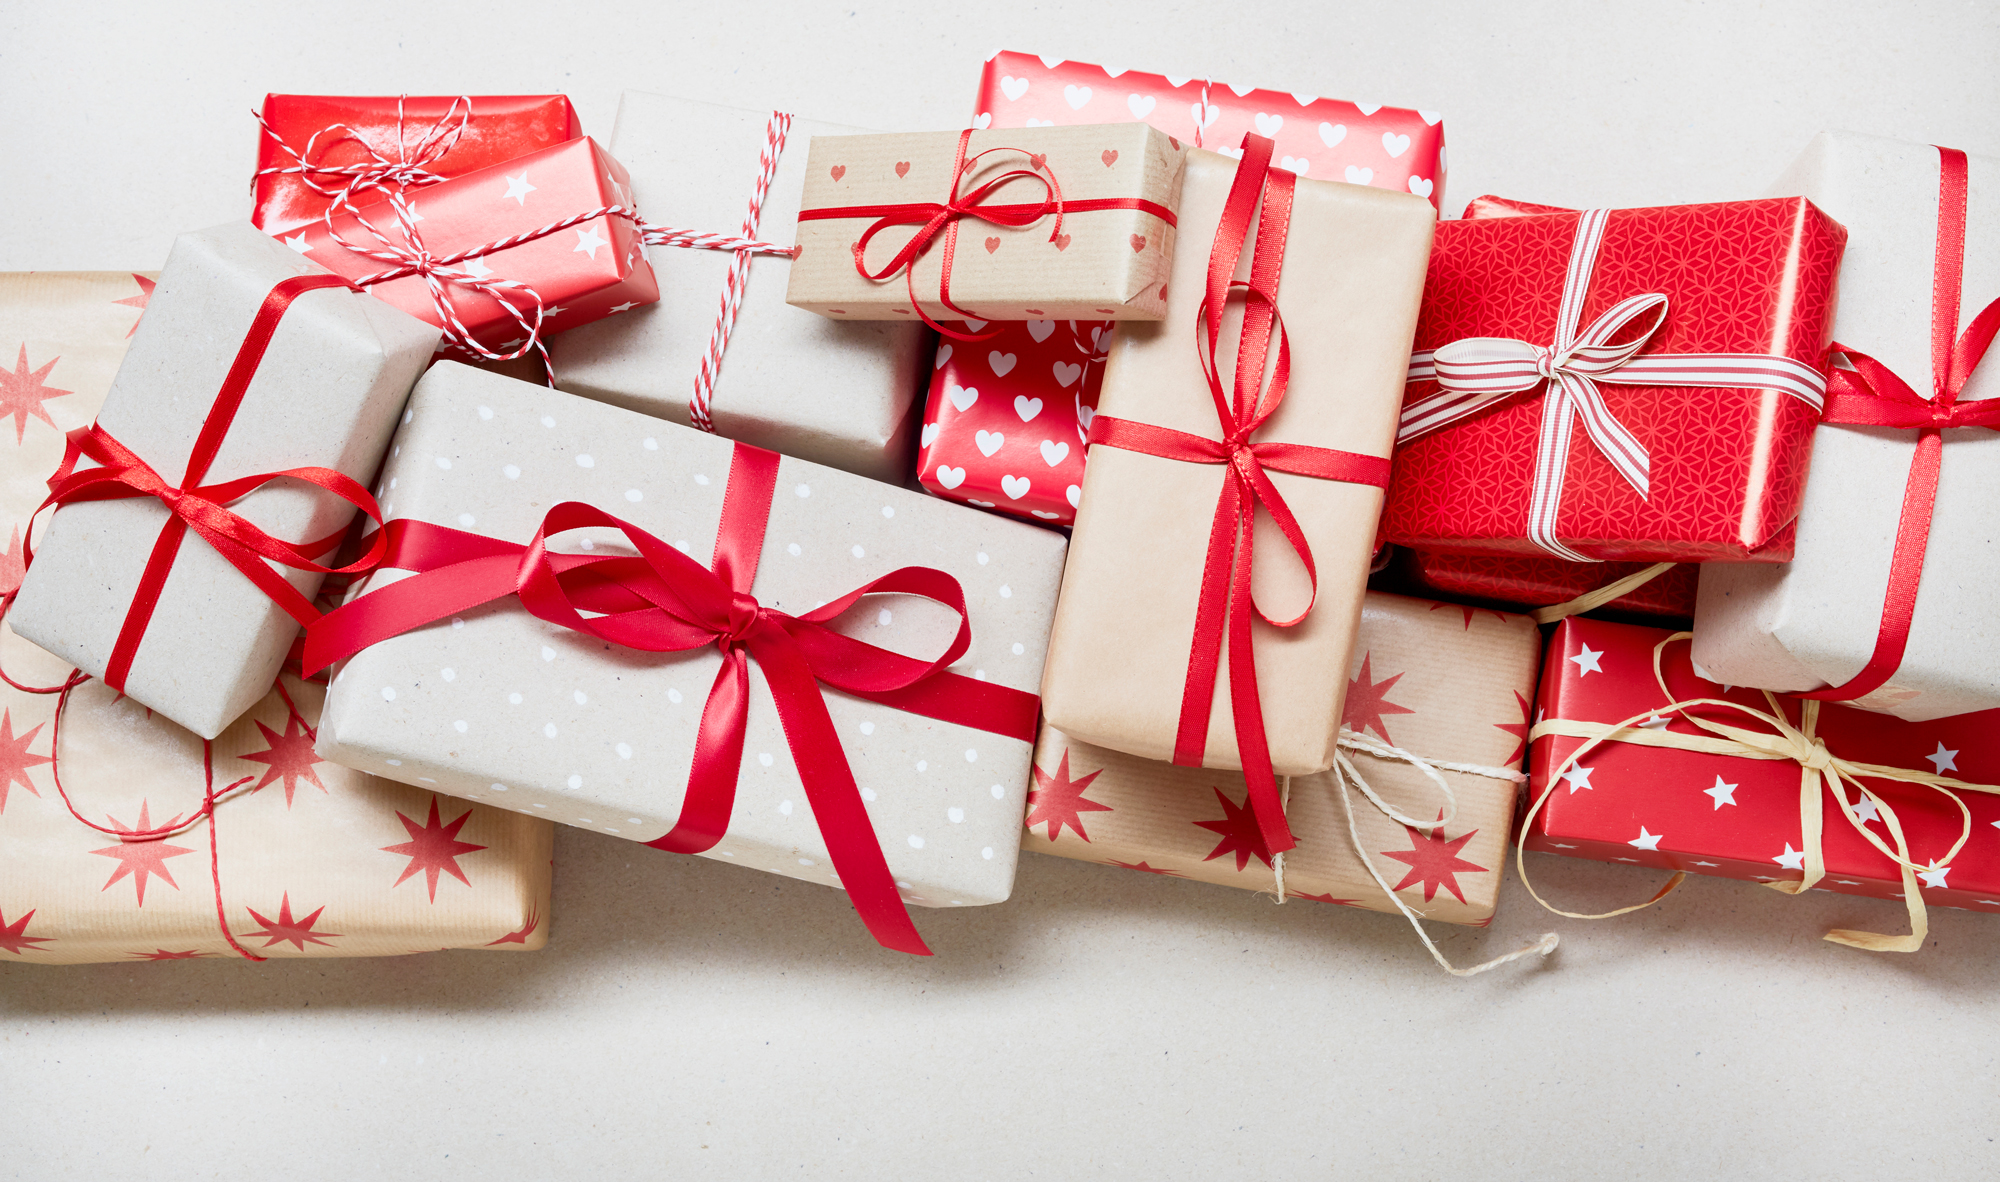 A grouping of holiday presents in white and red wrapping.